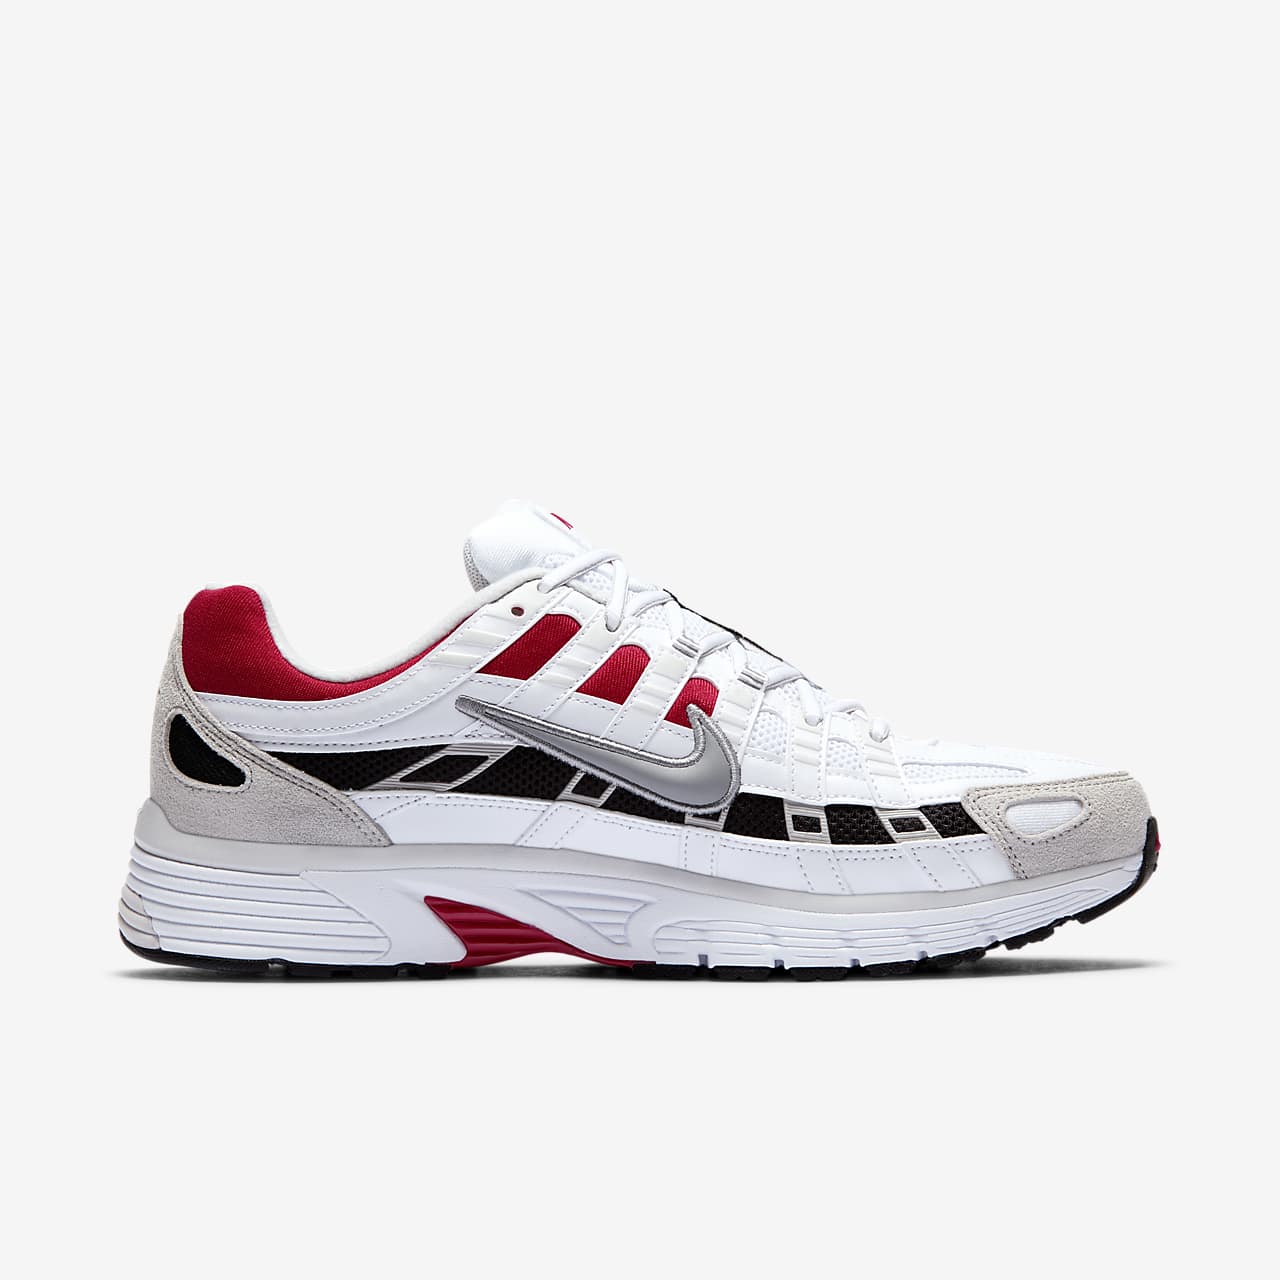 nike p 6000 white particle grey university red